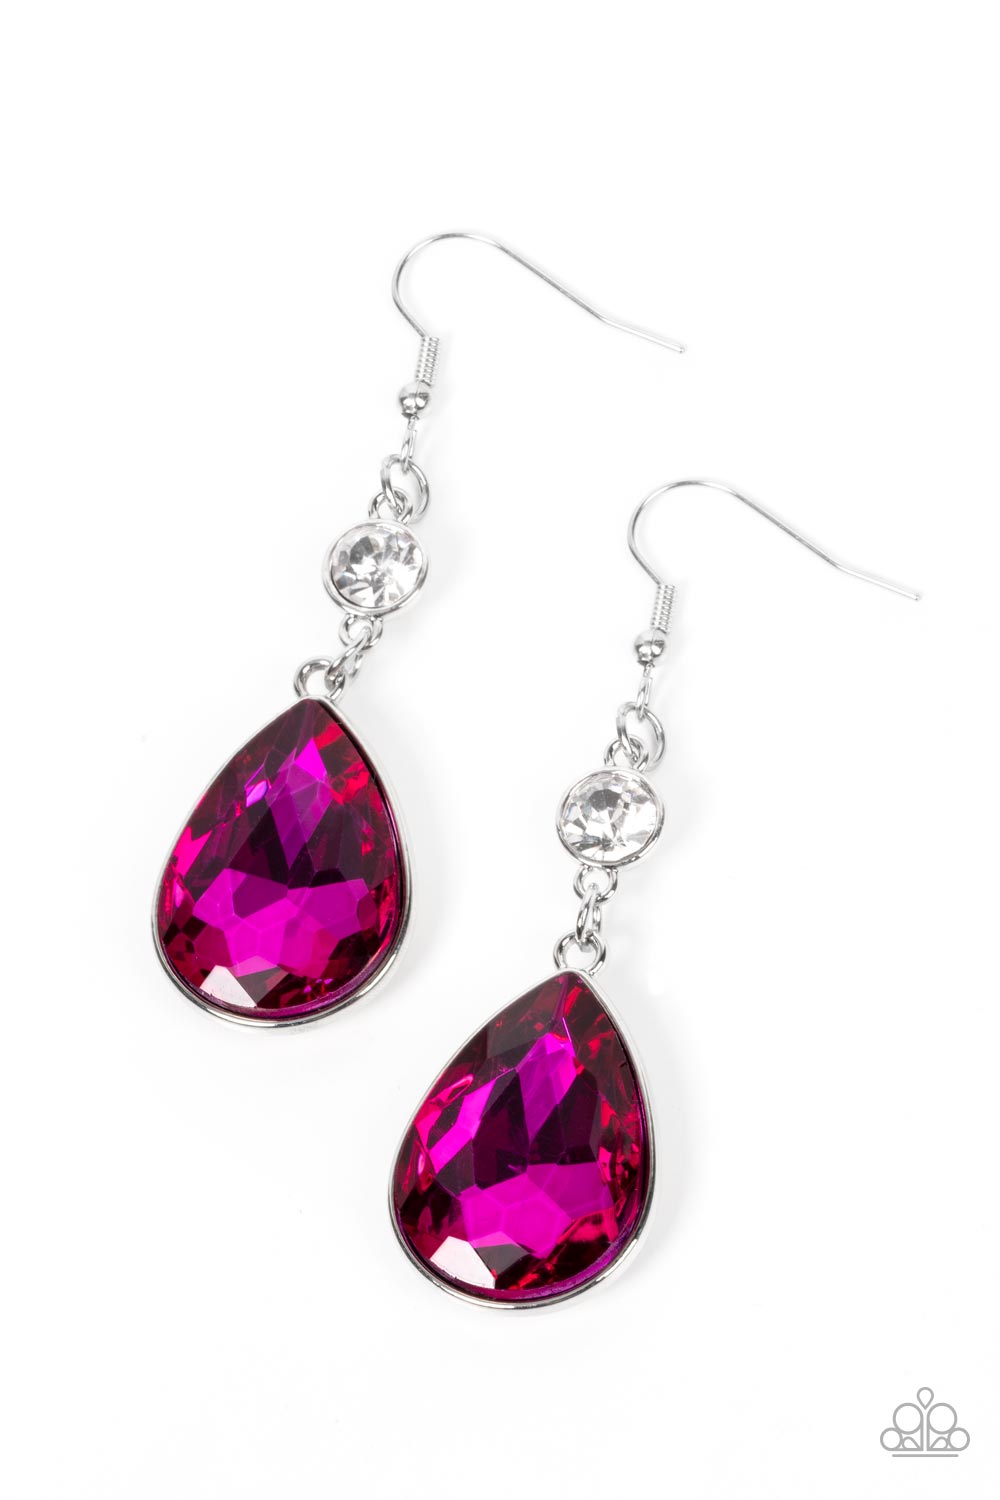 Smile for the Camera Pink Earring - Paparazzi Accessories  A dramatically oversized Fuchsia Fedora teardrop gem sparkles from the bottom of a stunning solitaire white rhinestone, resulting in a jaw-dropping dazzle. Earring attaches to a standard fishhook fitting.  Sold as one pair of earrings.